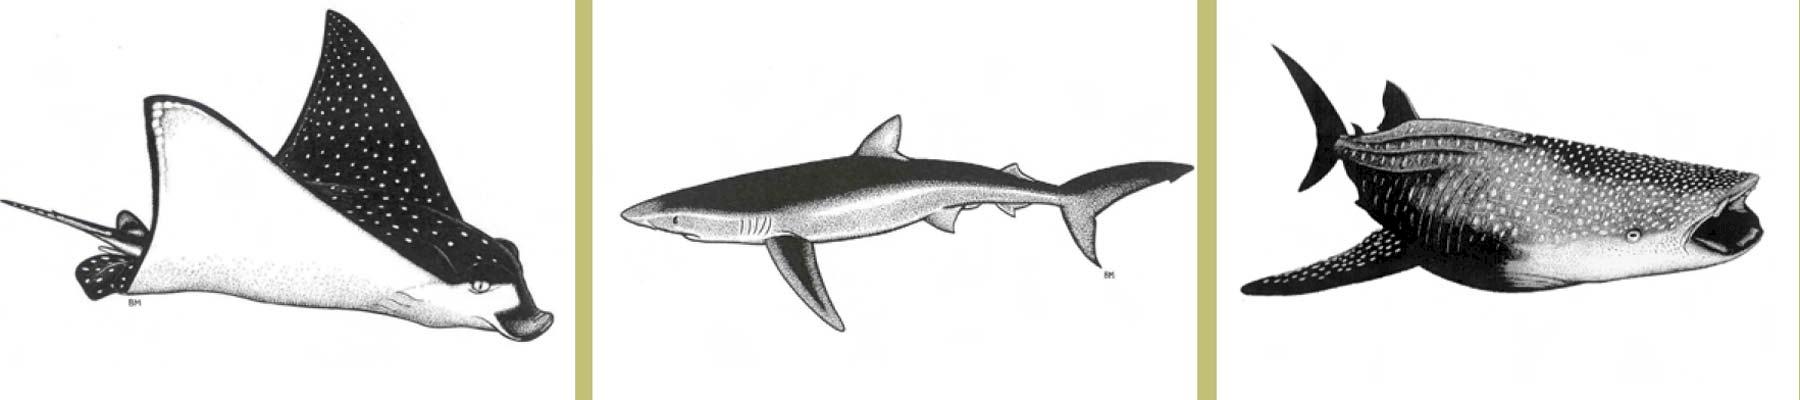 Spotted Ray Raja montagui, Blue Shark Prionace glauca and Whale Shark Rhincodon typus. Illustrations by Bruce Mahalski